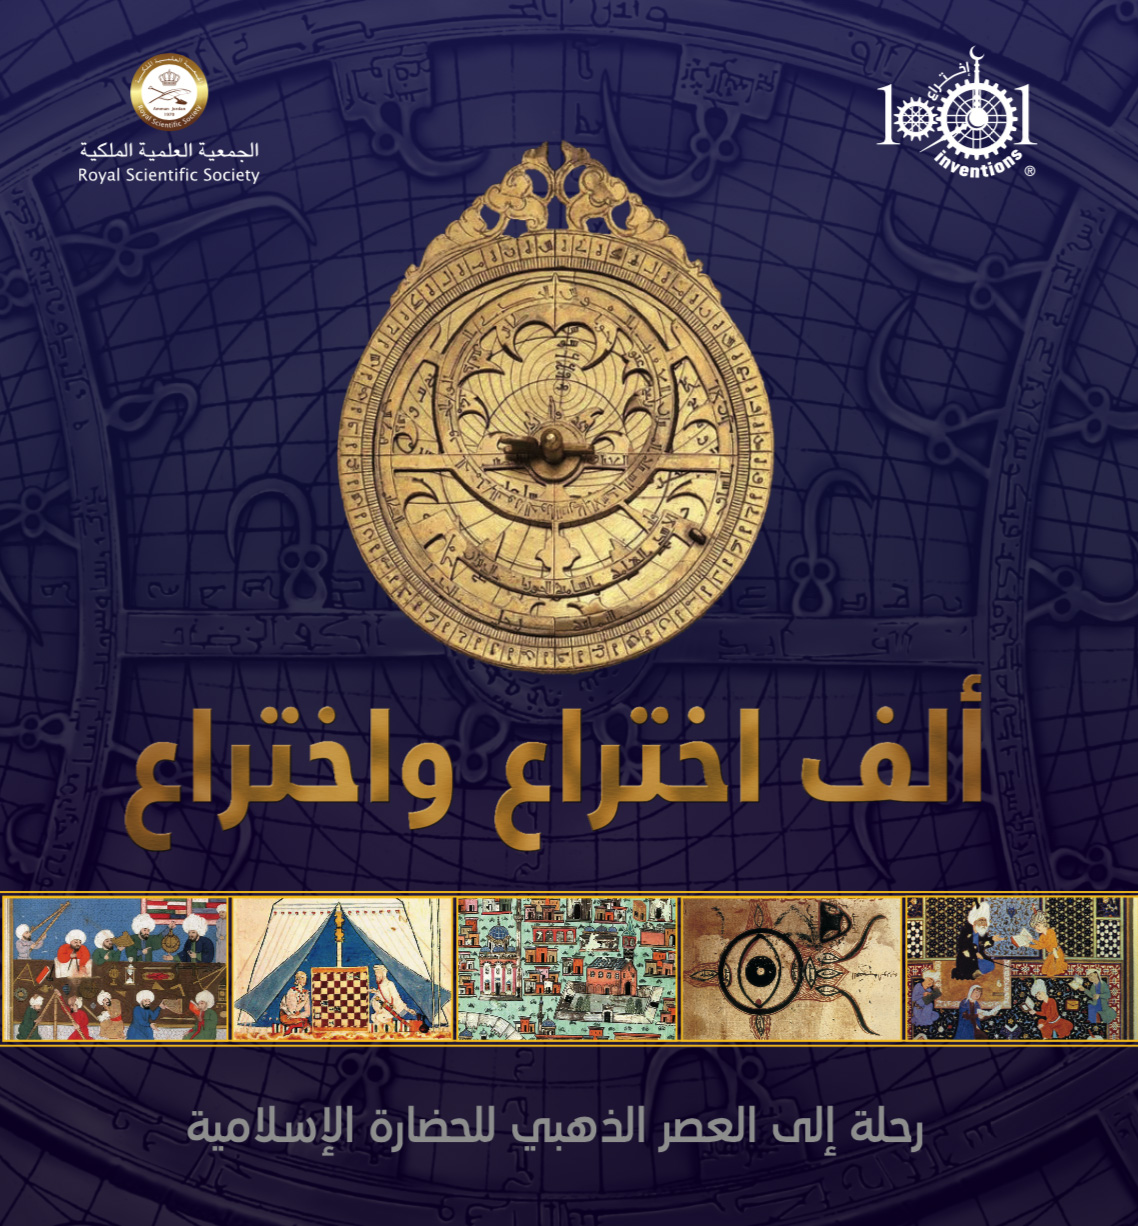 1001 Inventions: Journey to the Golden Age of Muslim Civilisation